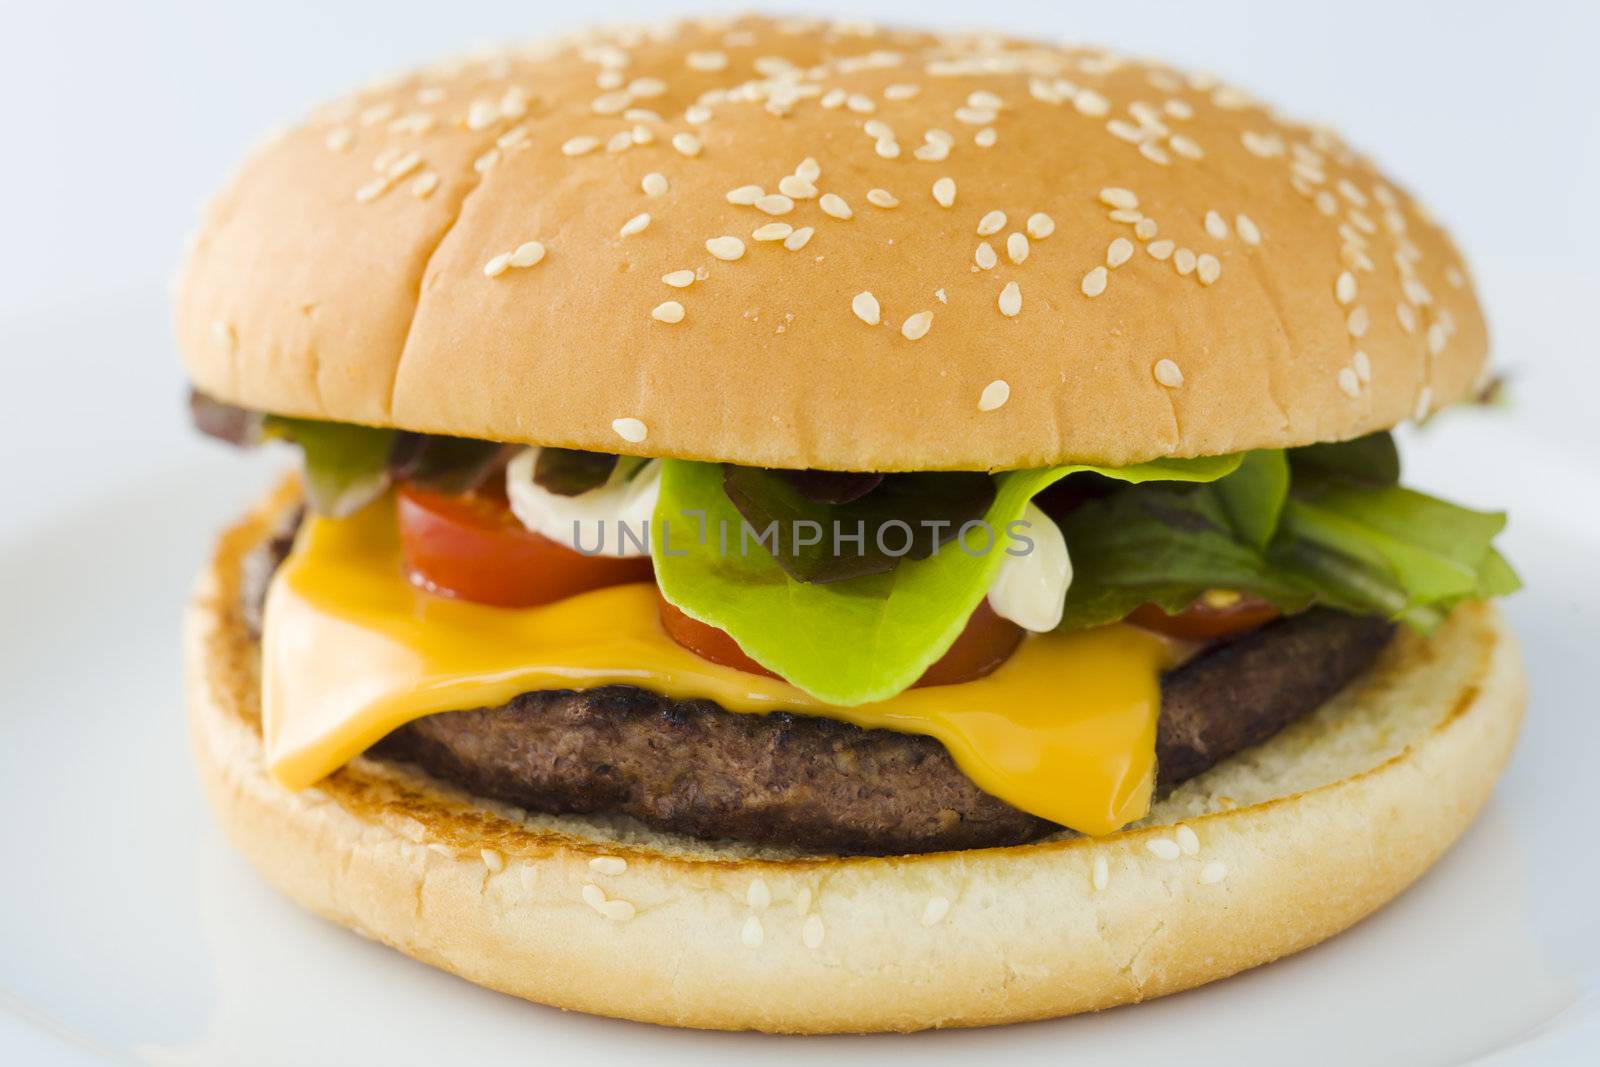 Homemade cheese burger on the plate over white background